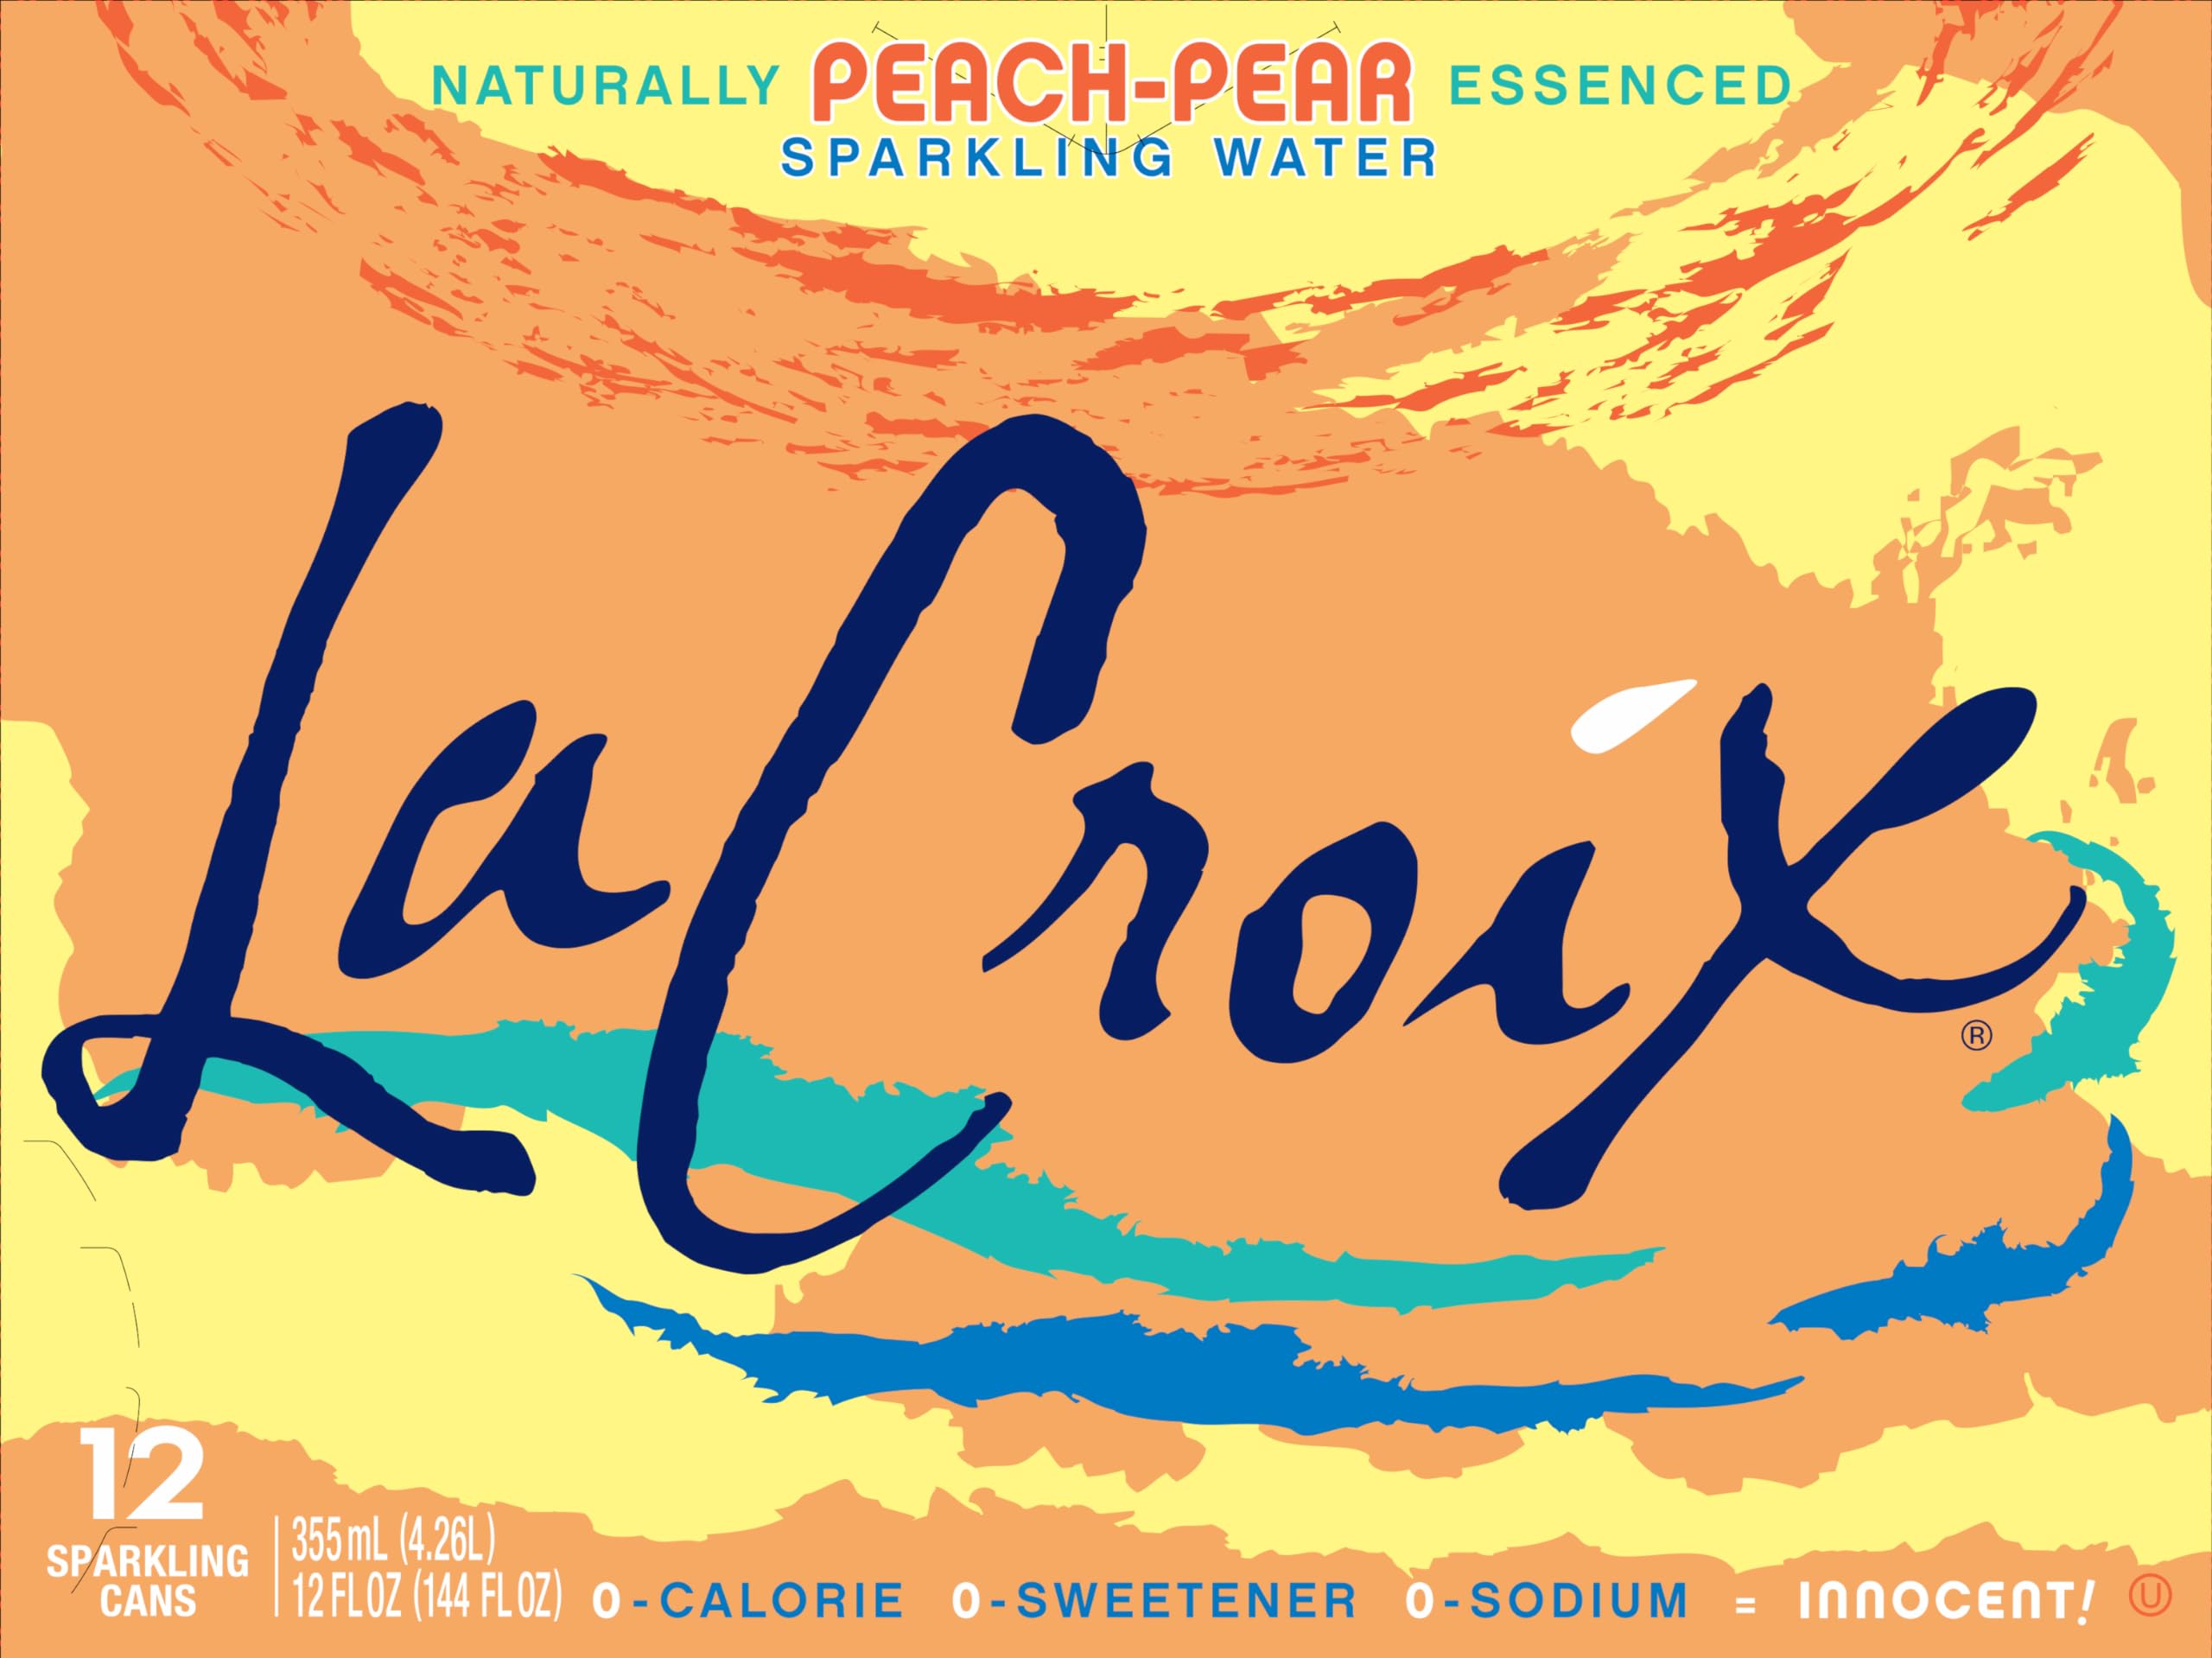 12-Pack 12-Oz LaCroix Naturally Sparkling Water (Peach-Pear) $3.60 + Free Shipping w/ Prime or on $35+